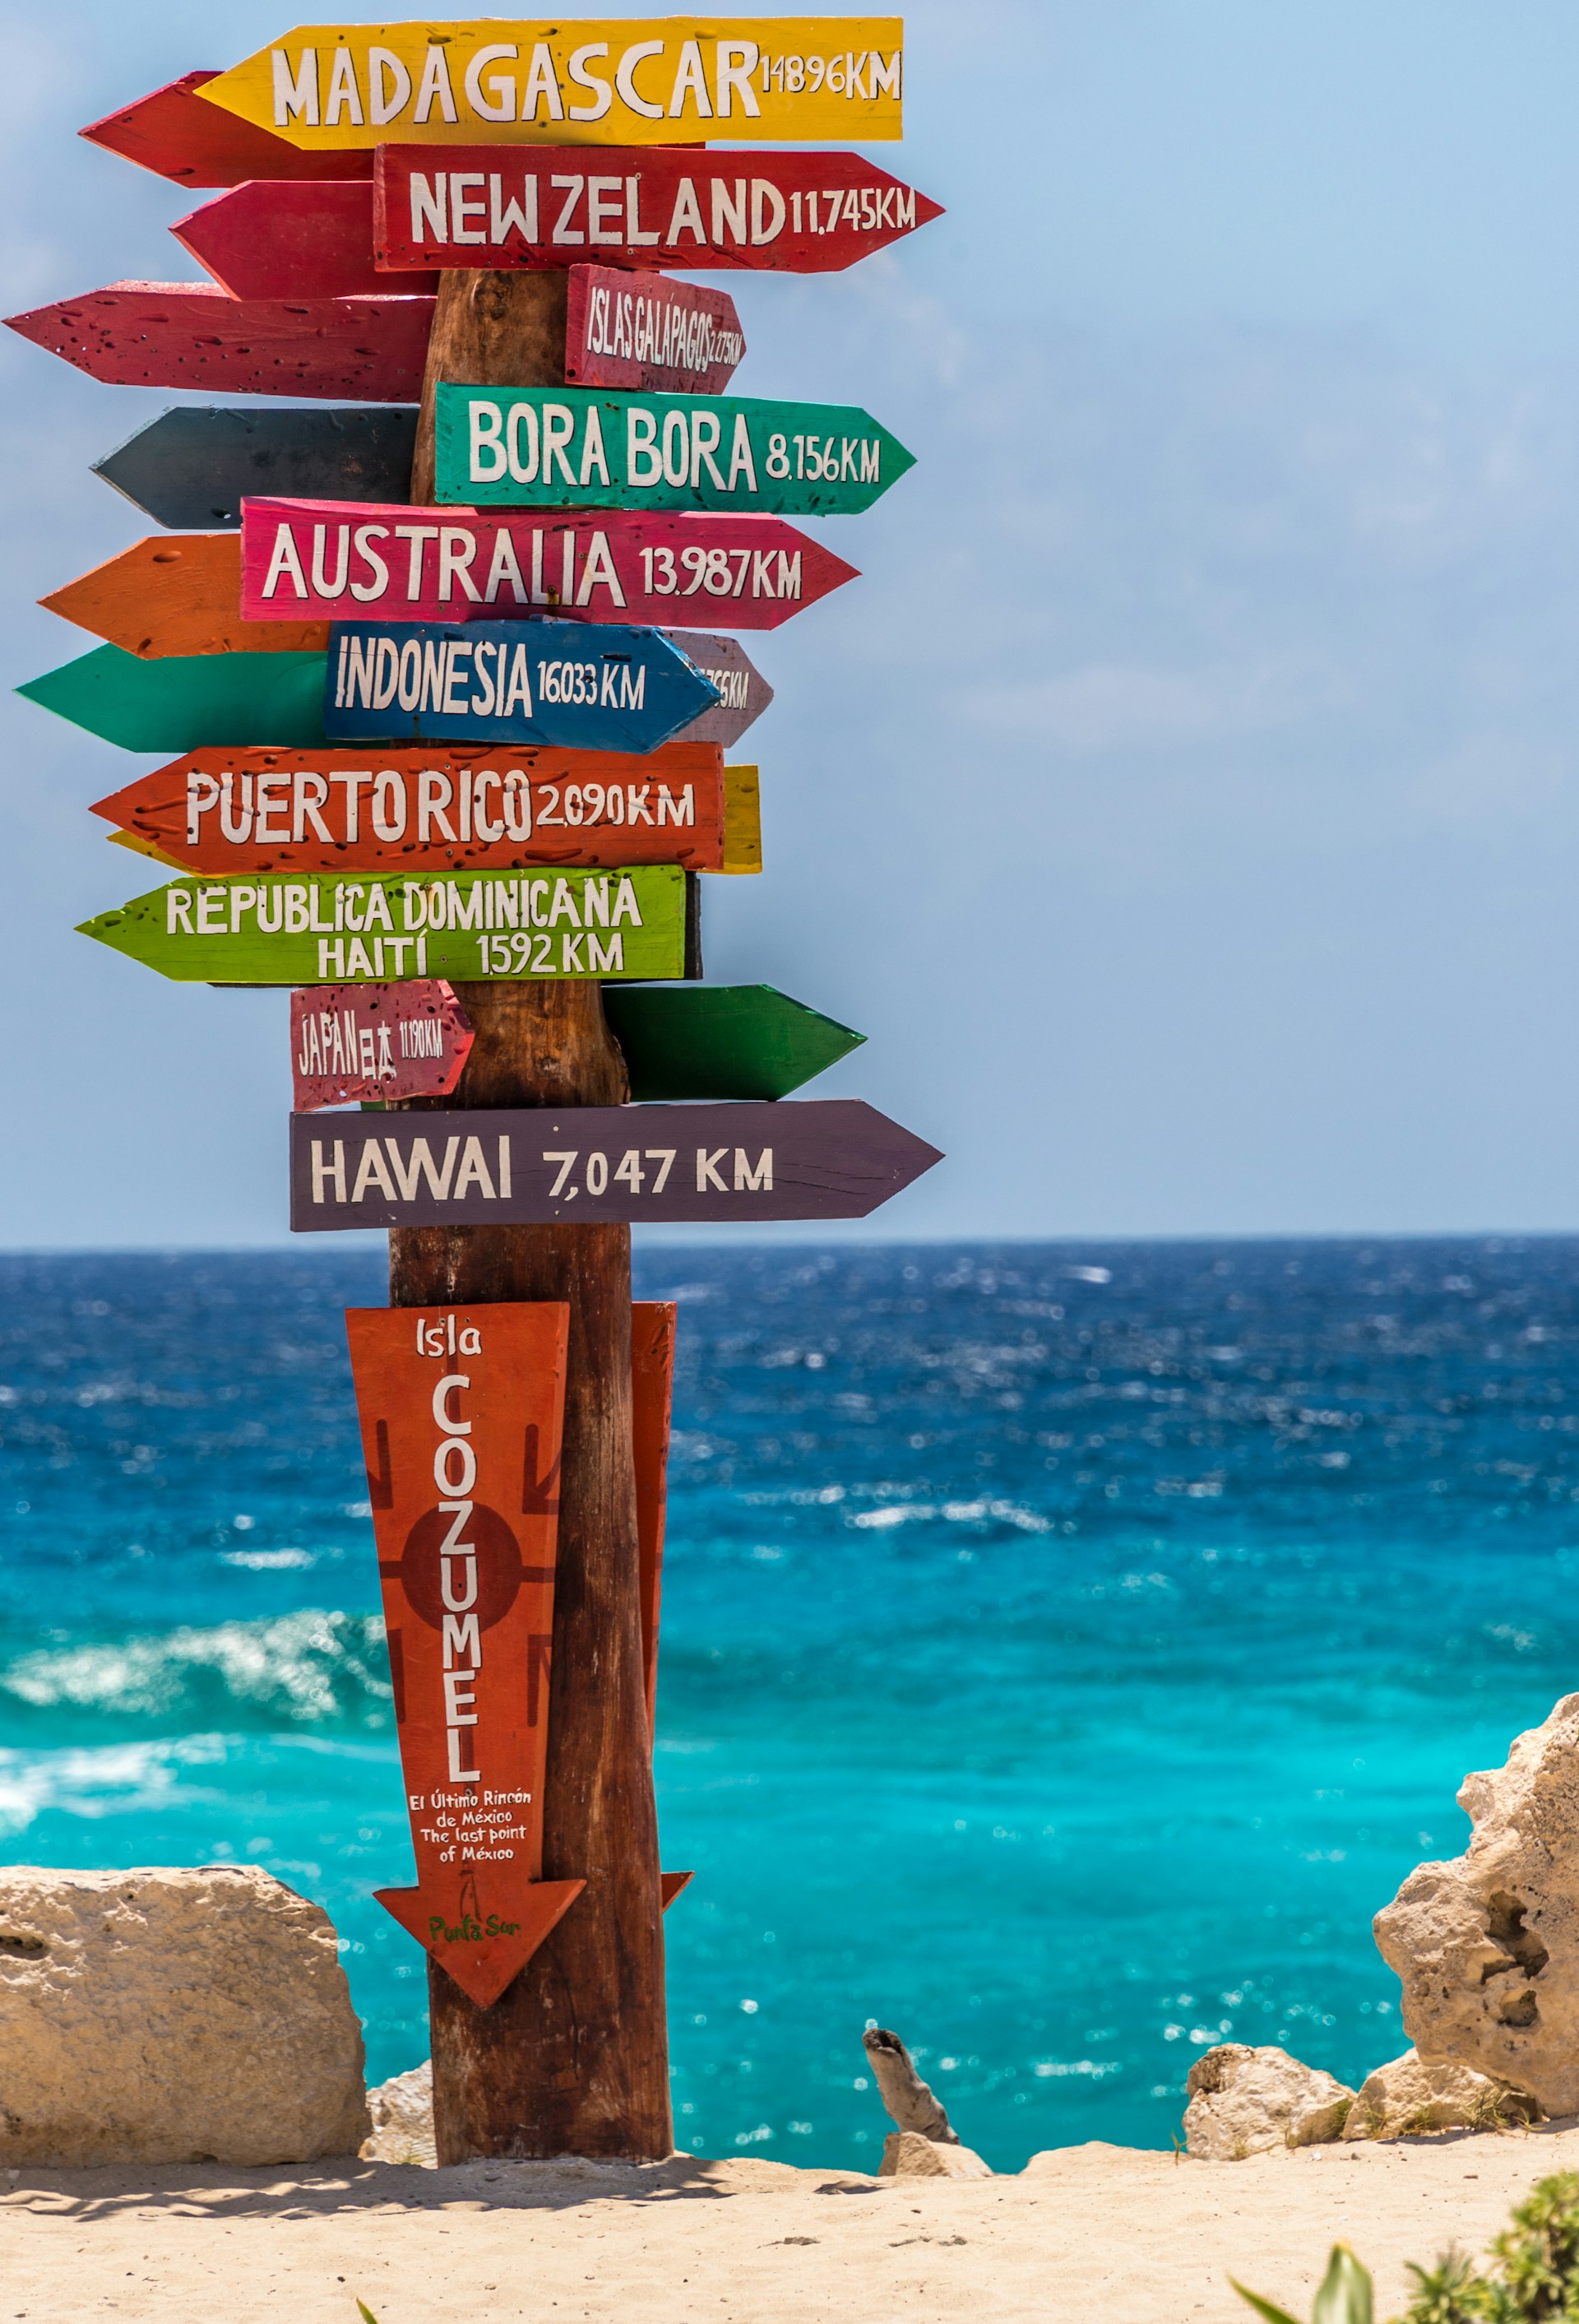 A colorful signpost near a beach shows many different arrows and distances to different locations worldwide